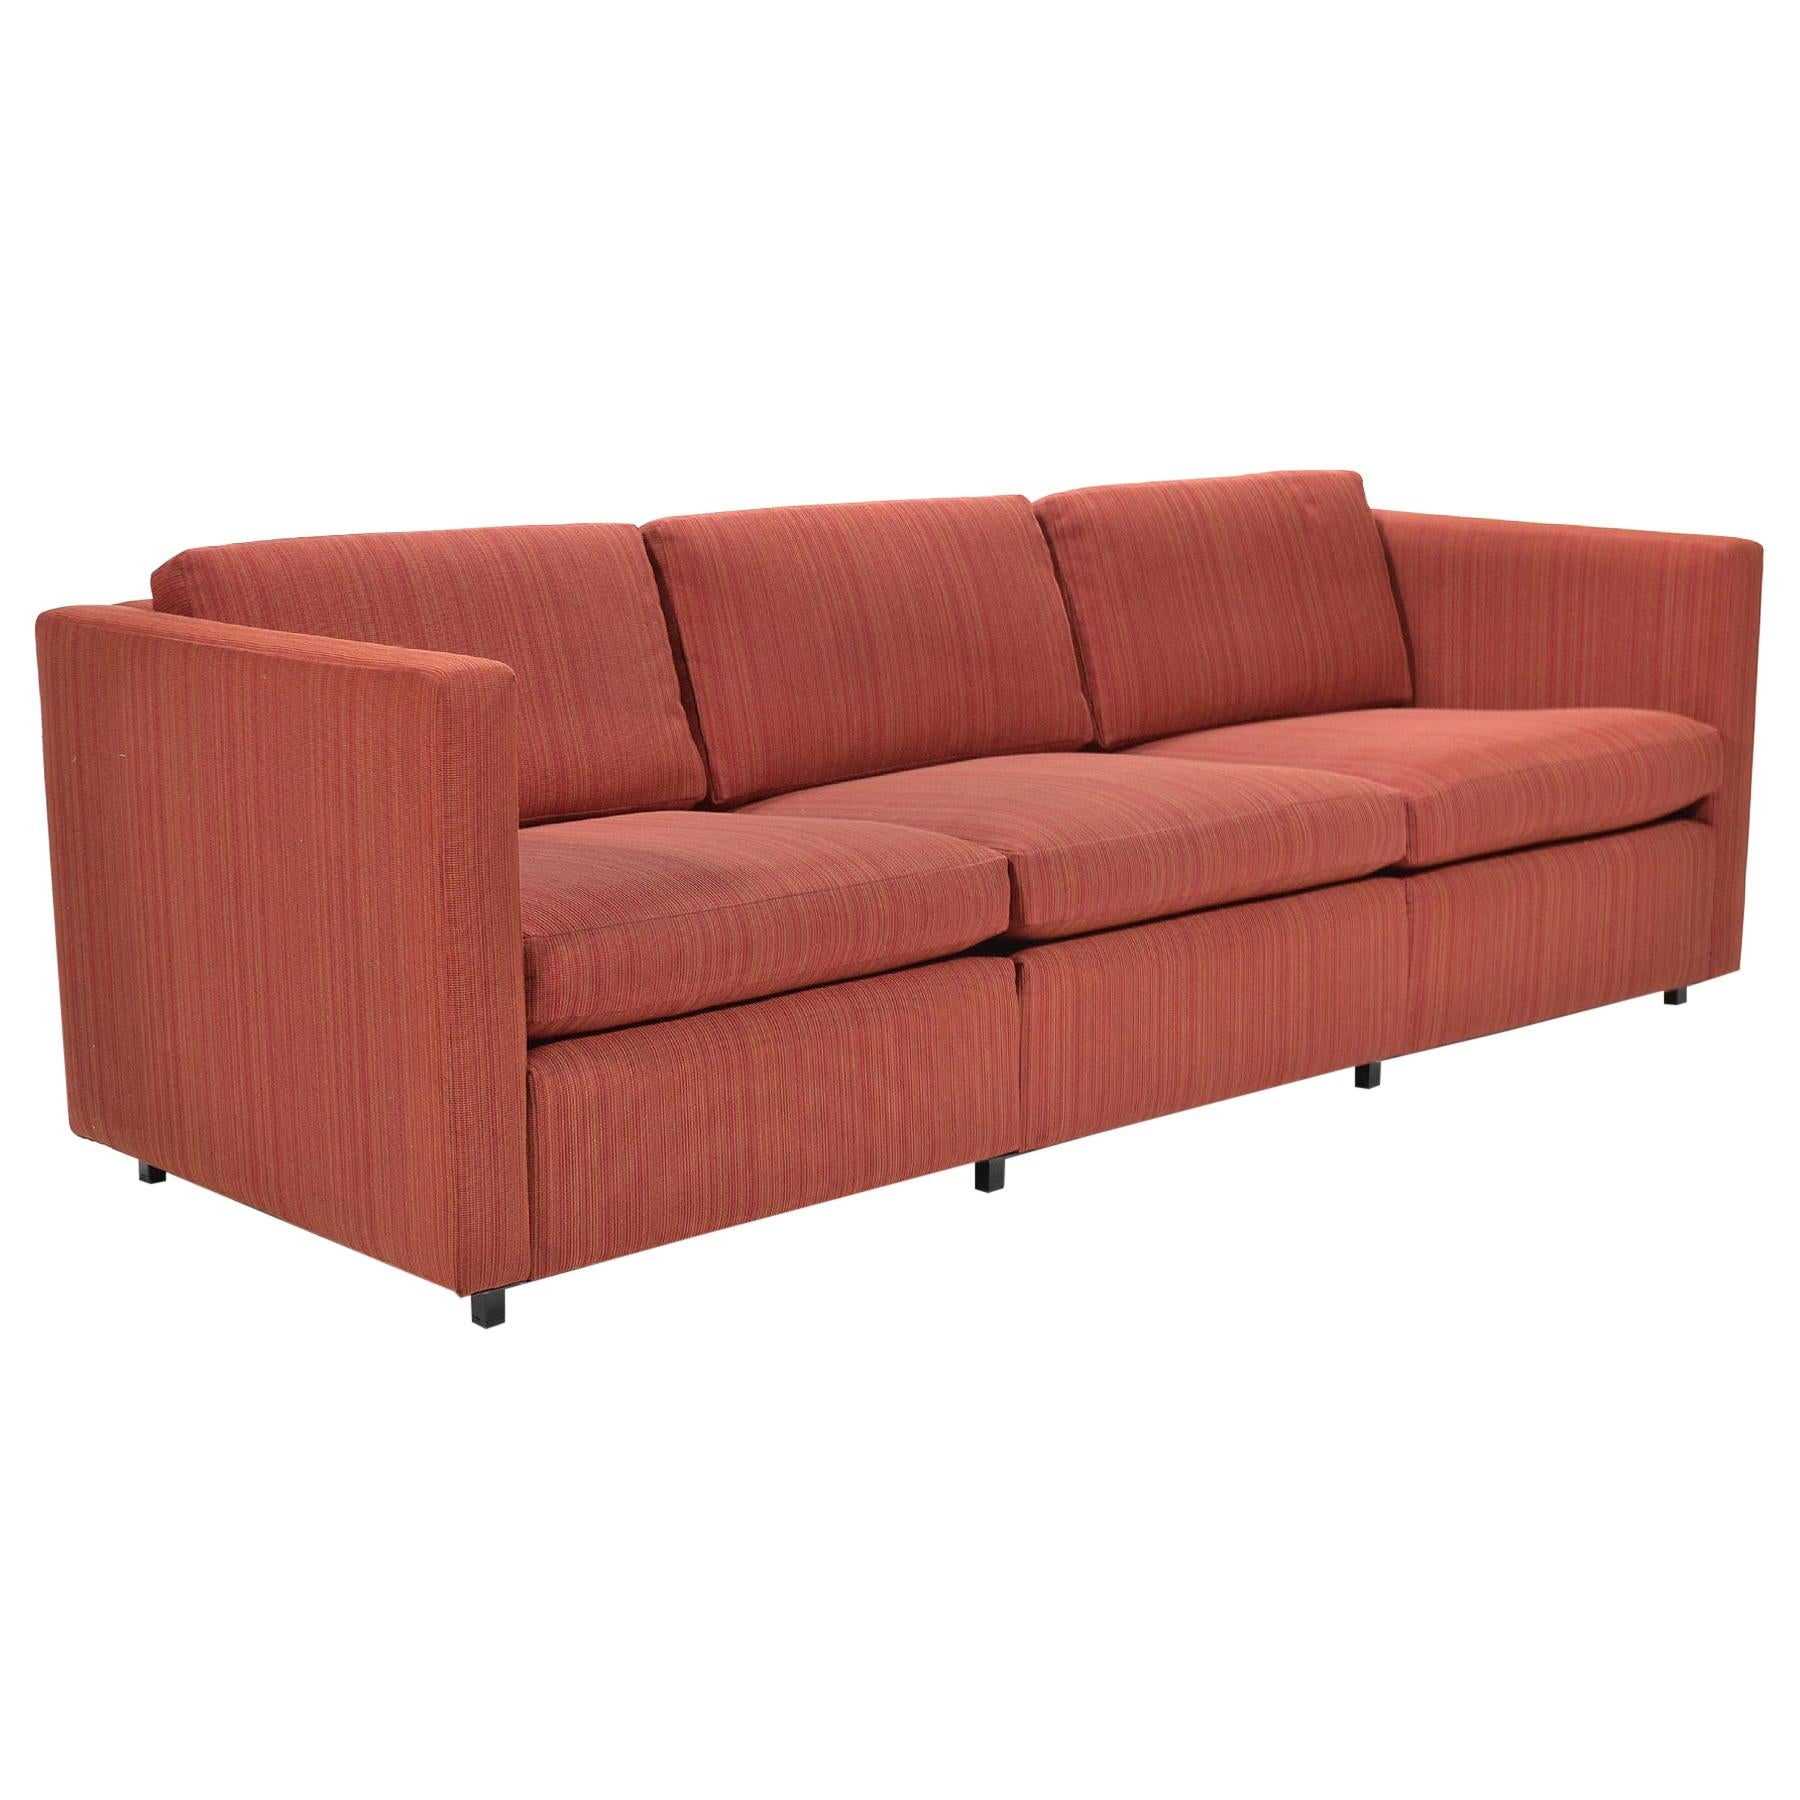 Charles Pfister Petite Sofa by Knoll For Sale